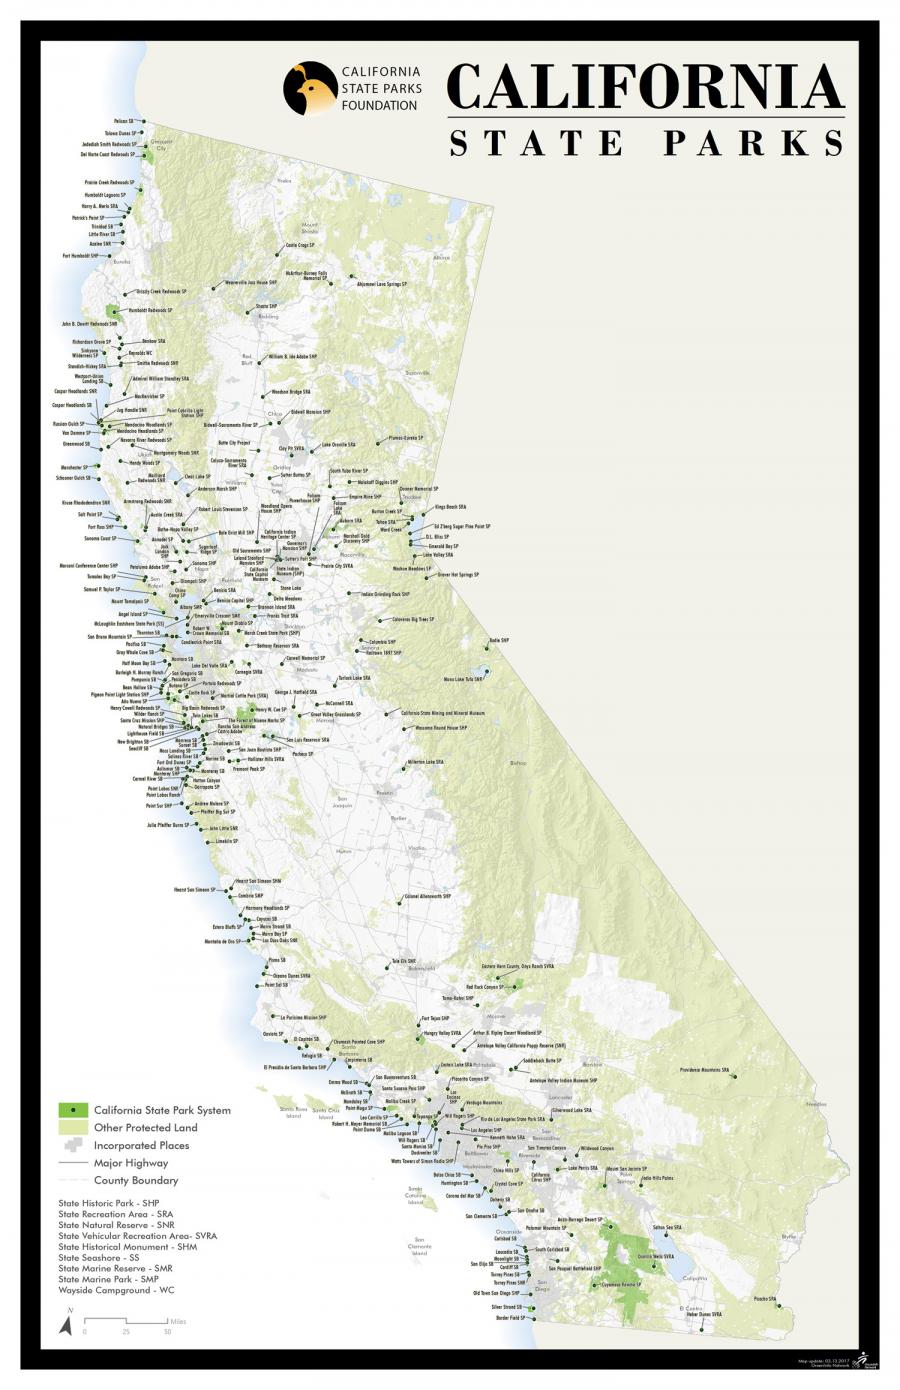 california state parks map Greeninfo Network Information And Mapping In The Public Interest california state parks map